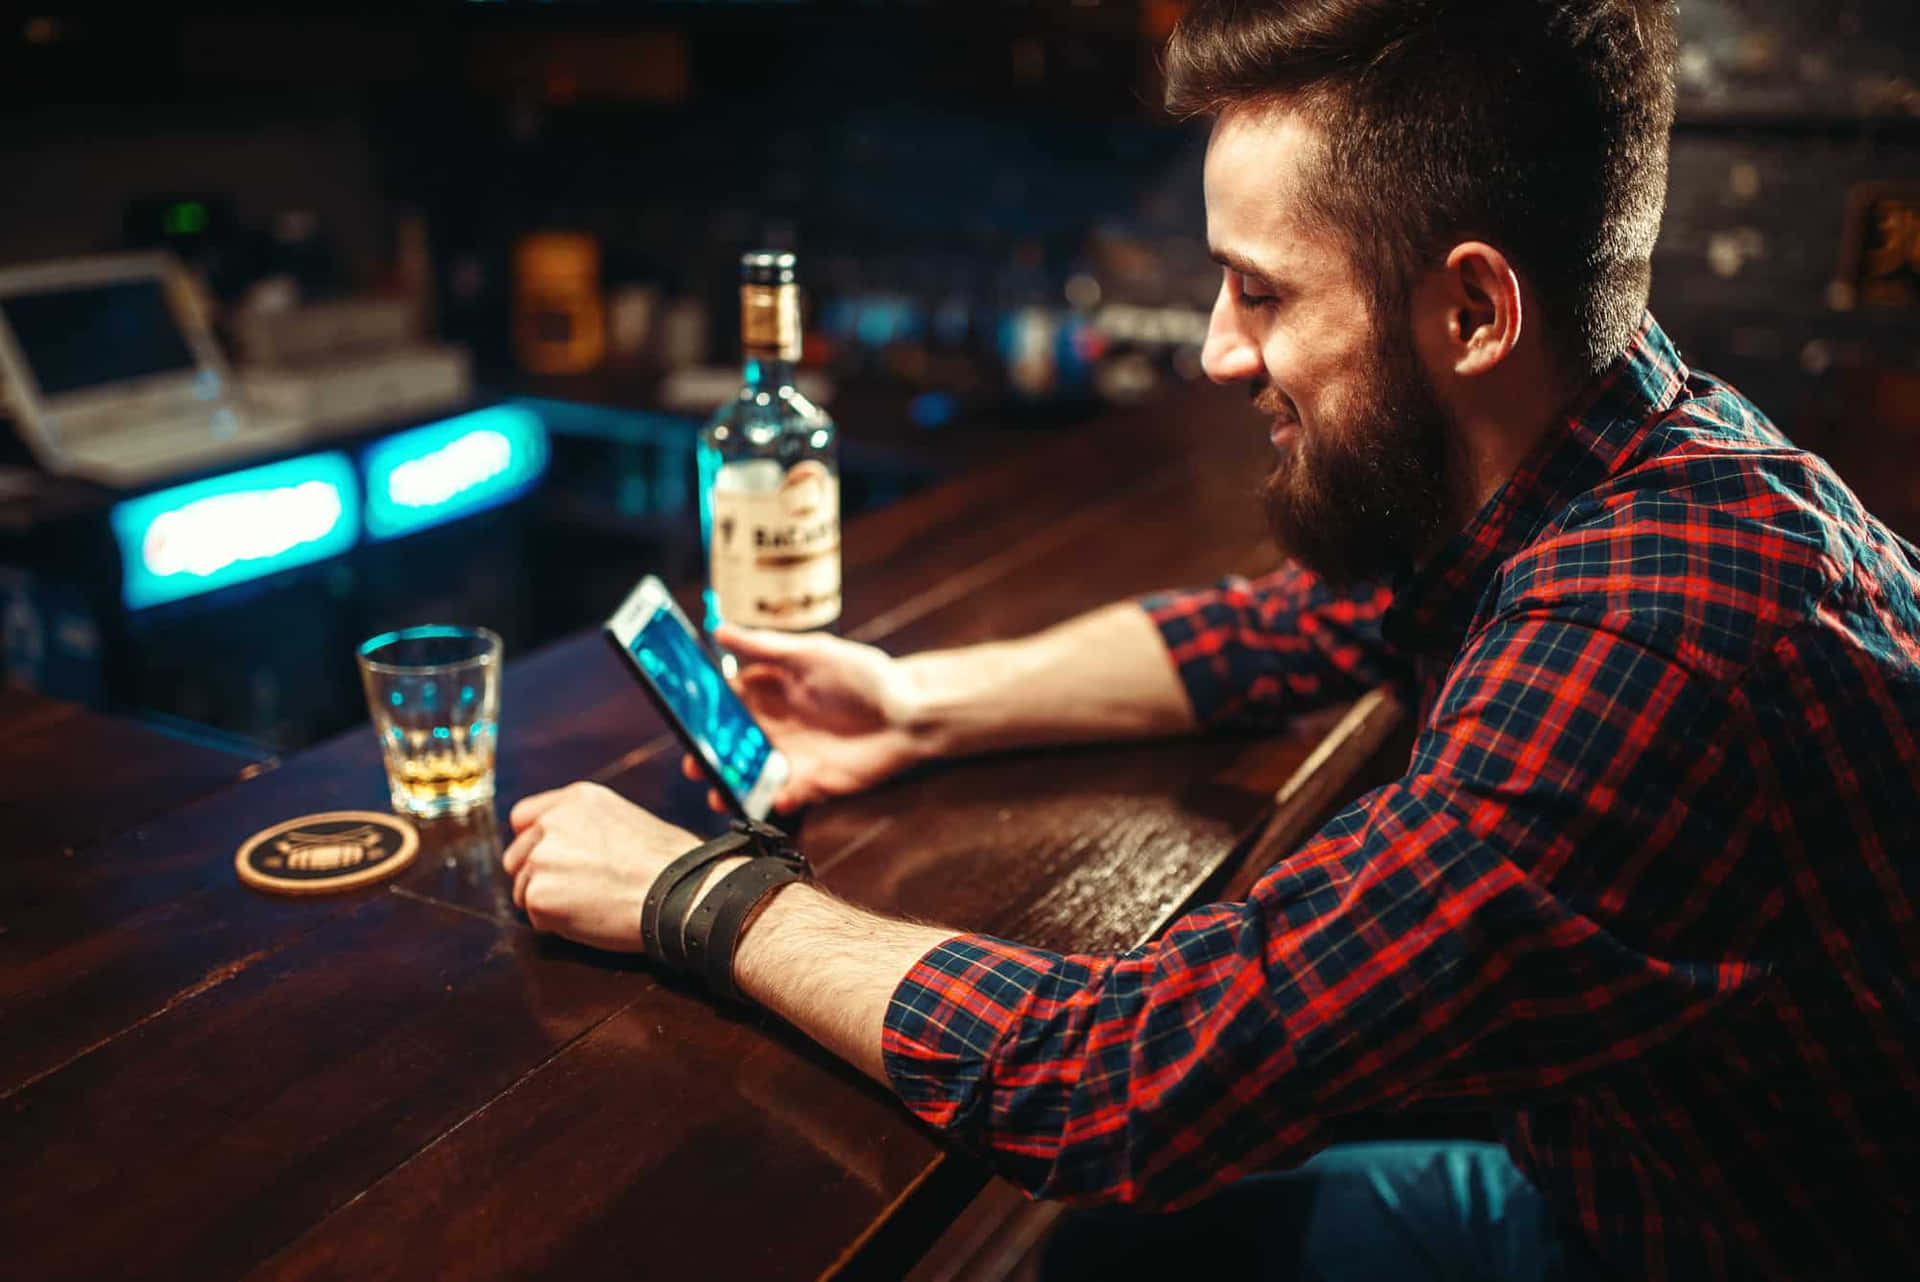 A Man Is Using His Phone At A Bar